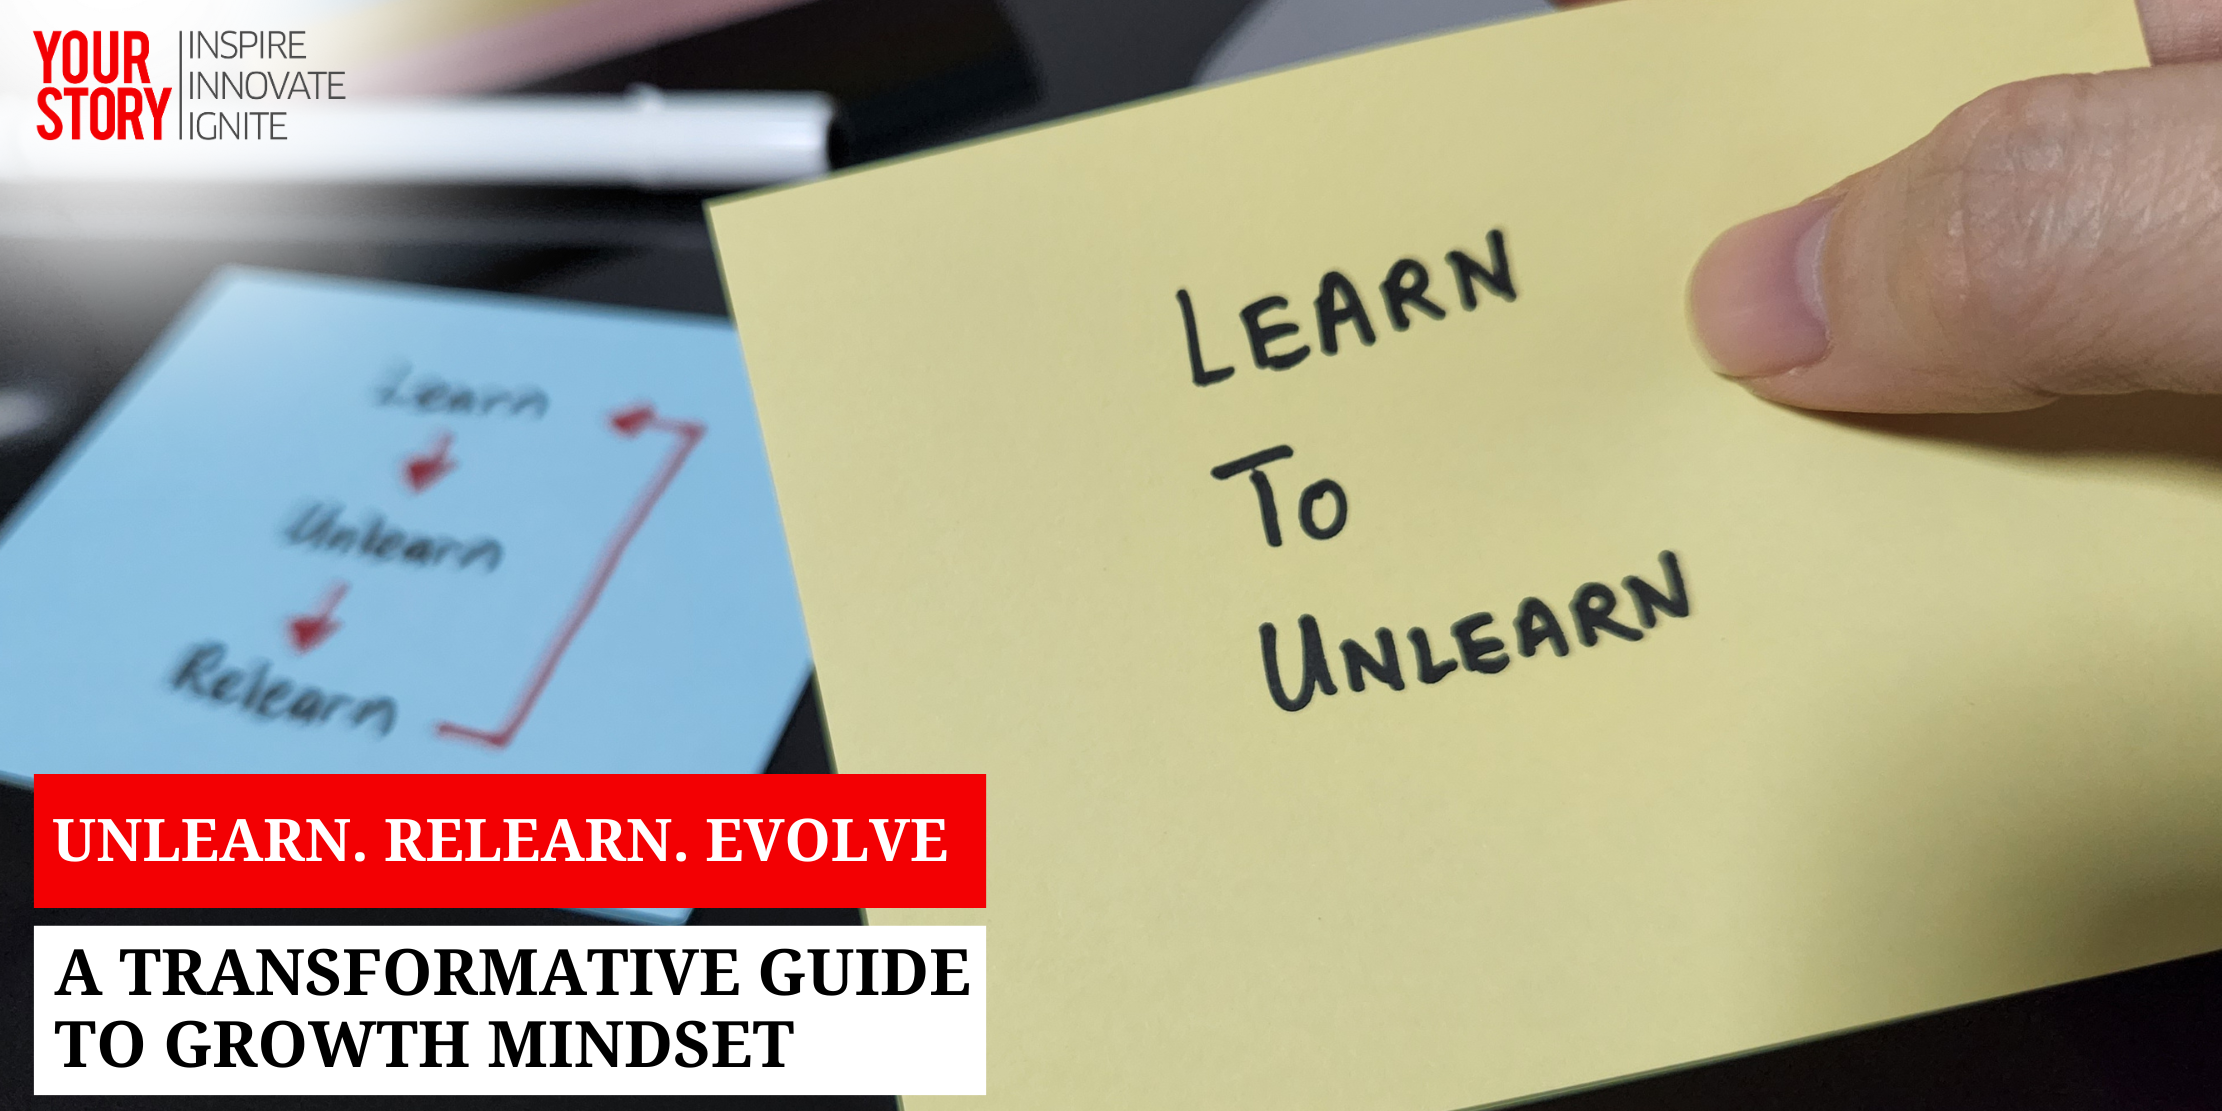 Unlearn. Relearn. Evolve: A Transformative Guide to Growth Mindset